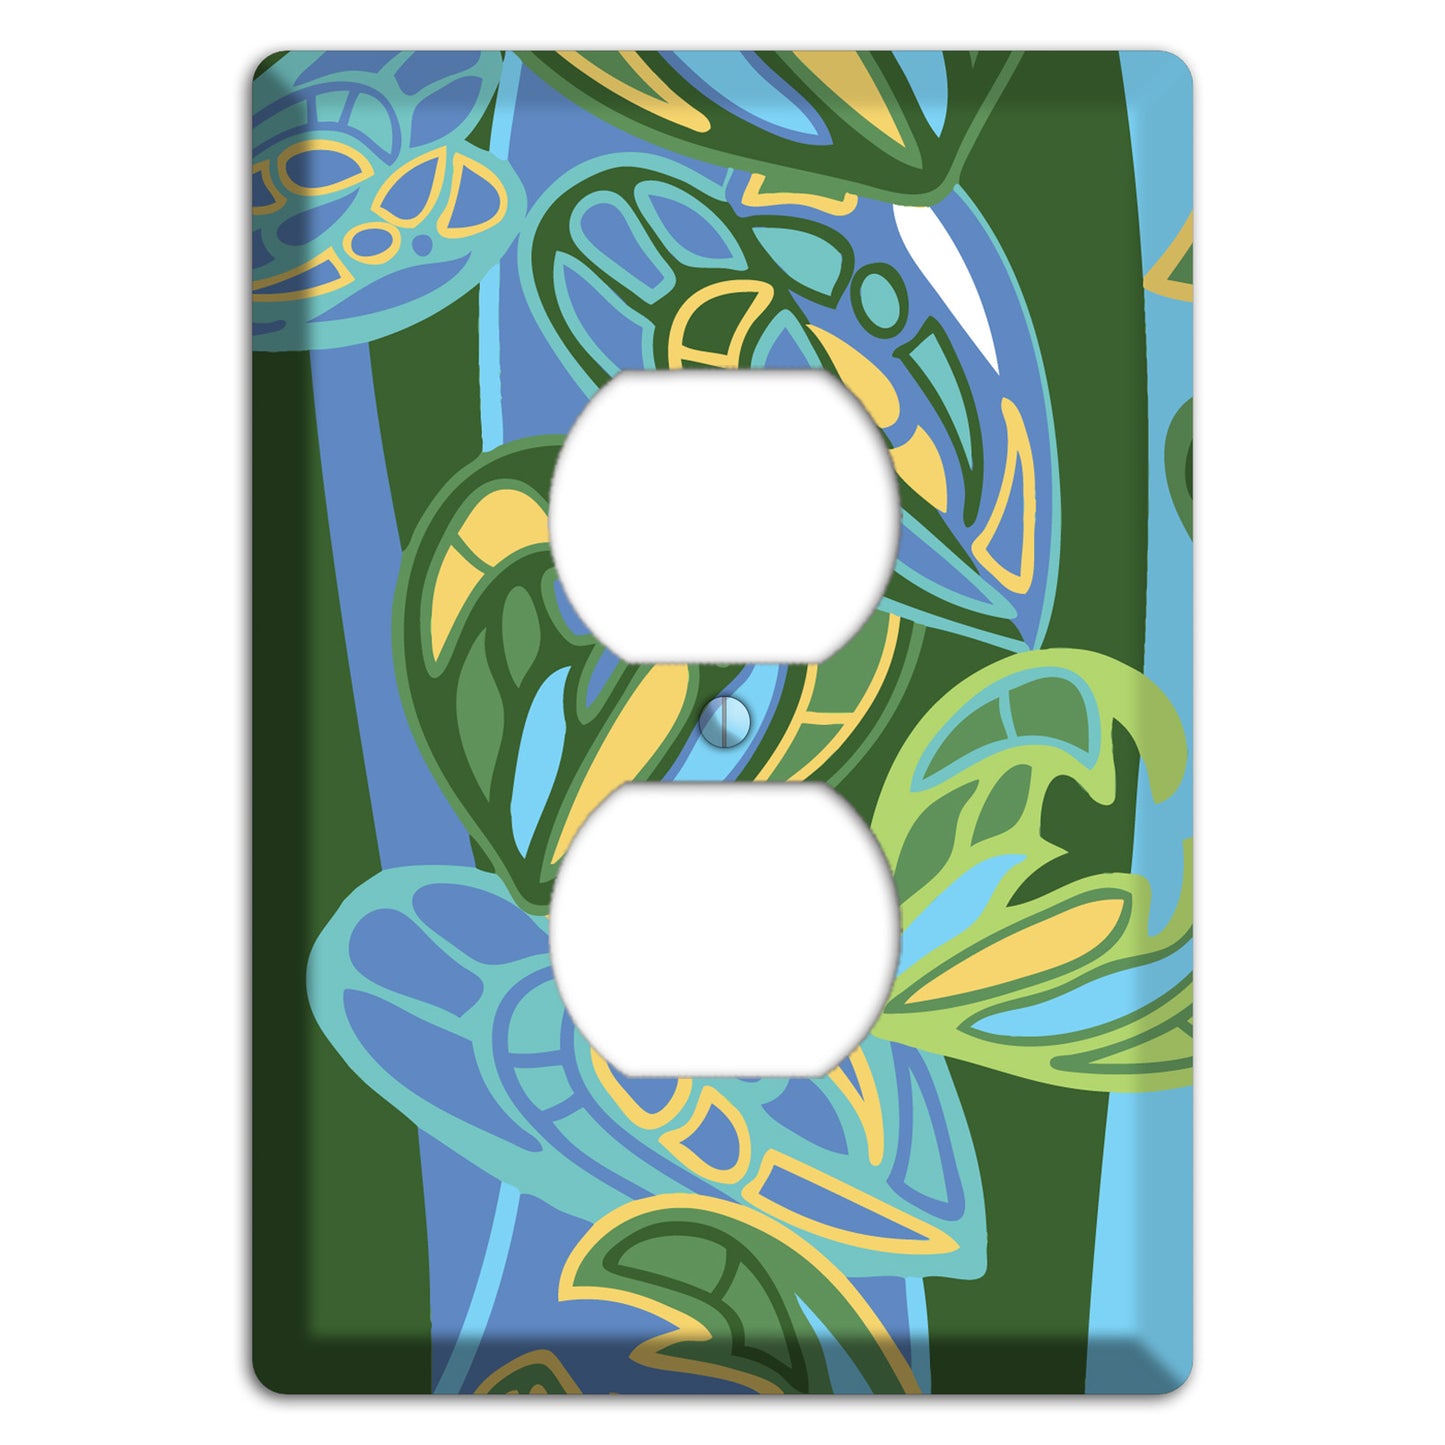 Pacific Blue and Green Duplex Outlet Wallplate